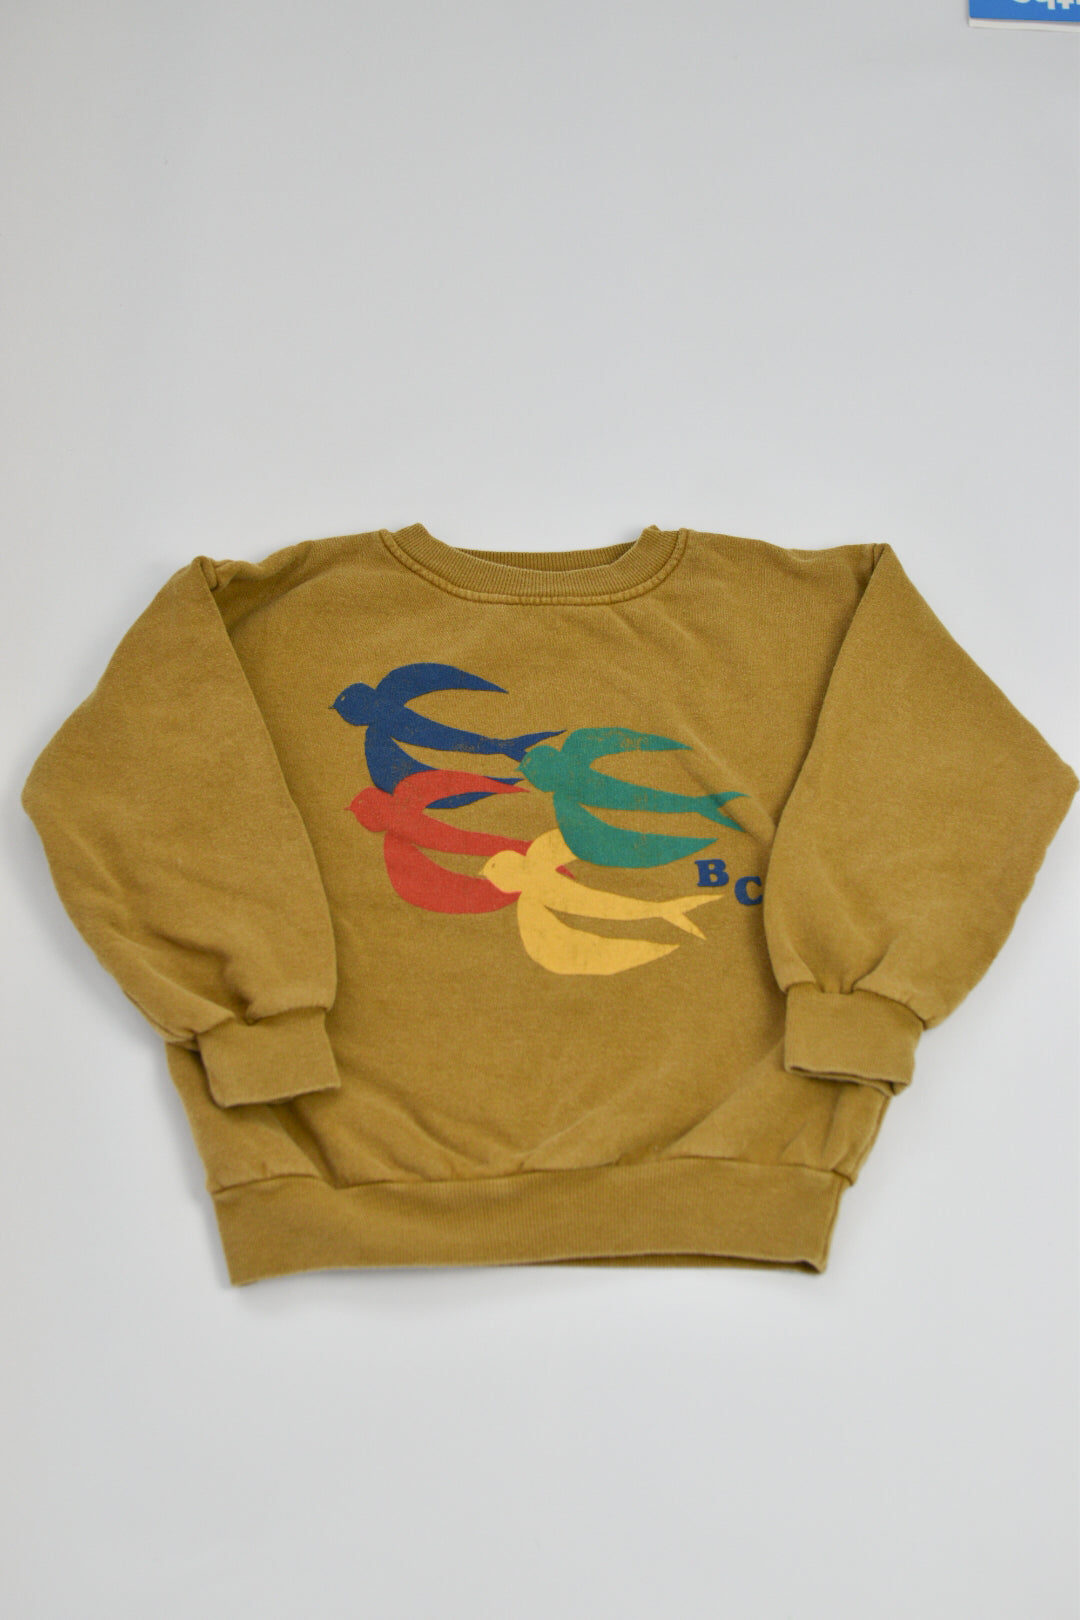 RE LOVED Bobo Choses sweat top  8-9